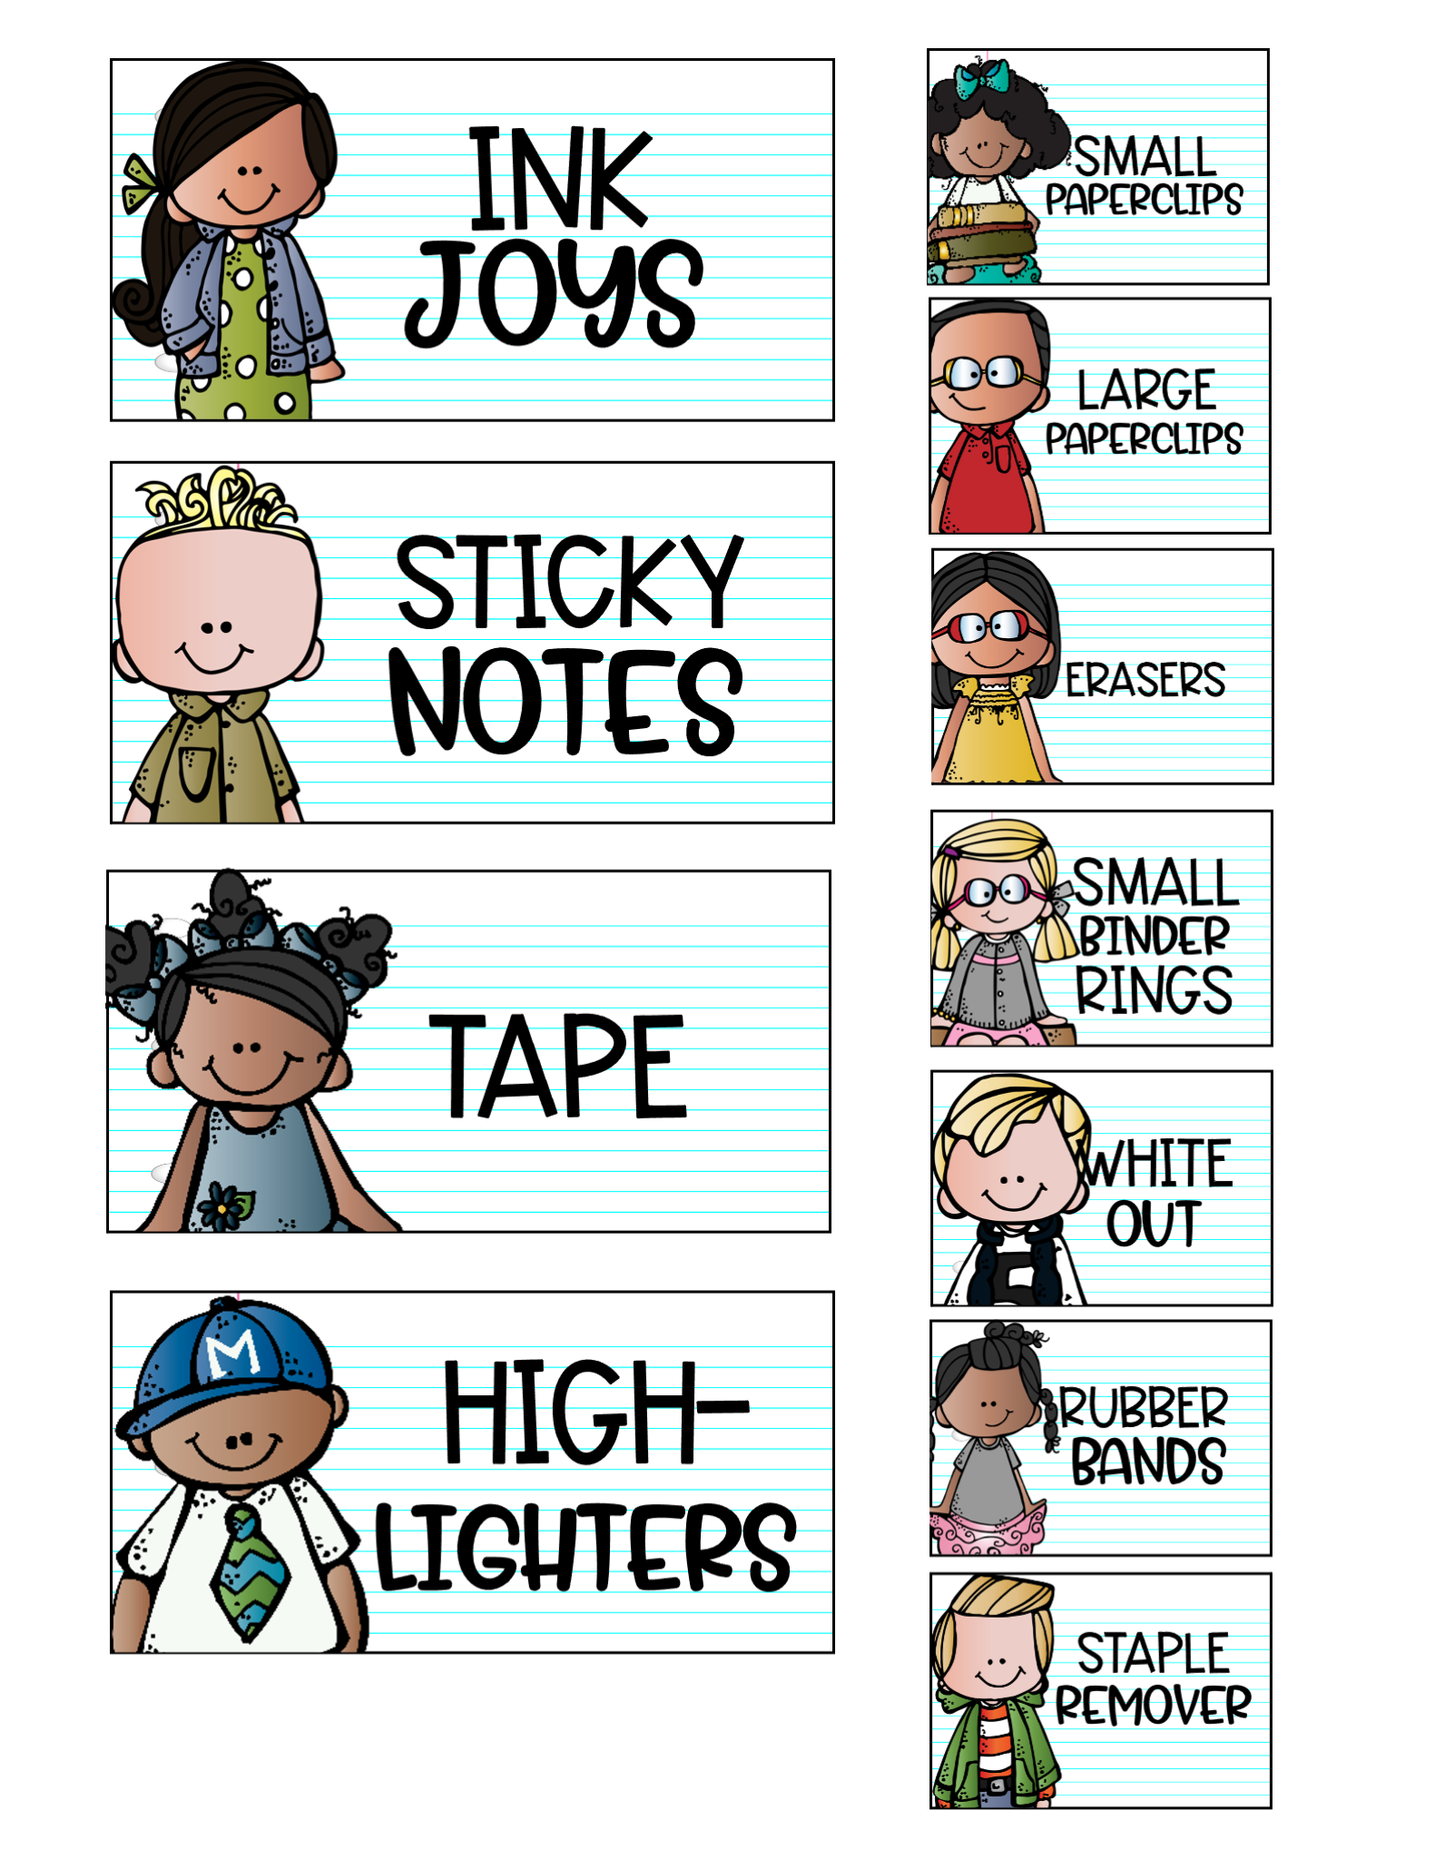 Teacher Toolbox Labels Set Notebook Paper | The Ultimate Organizational Solution for Teachers